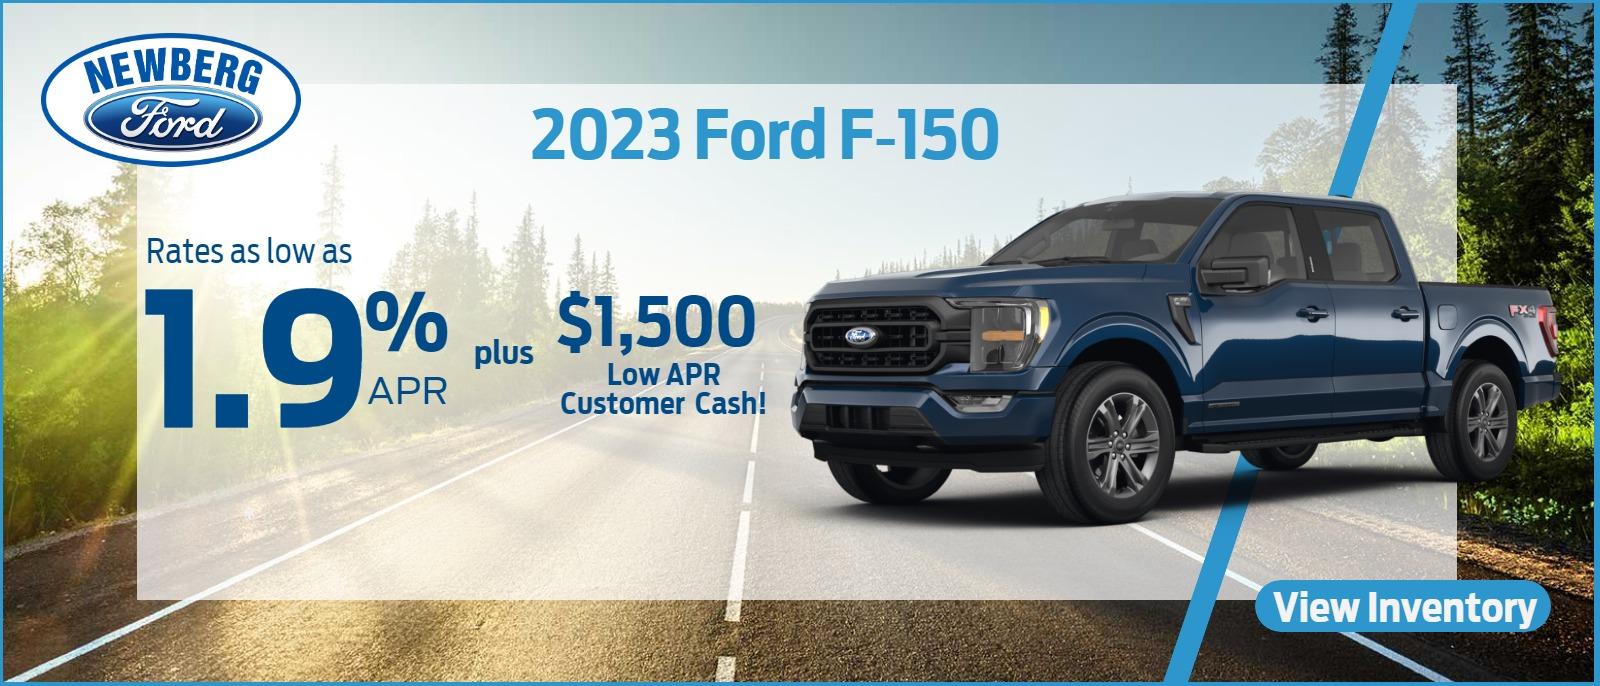 1.9% APR FOR 36 MONTHS PLUS $1,500 LOW APR CUSTOMER CASH ON NEW 2023 F-150 TRUCKS FROM NEWBERG FORD